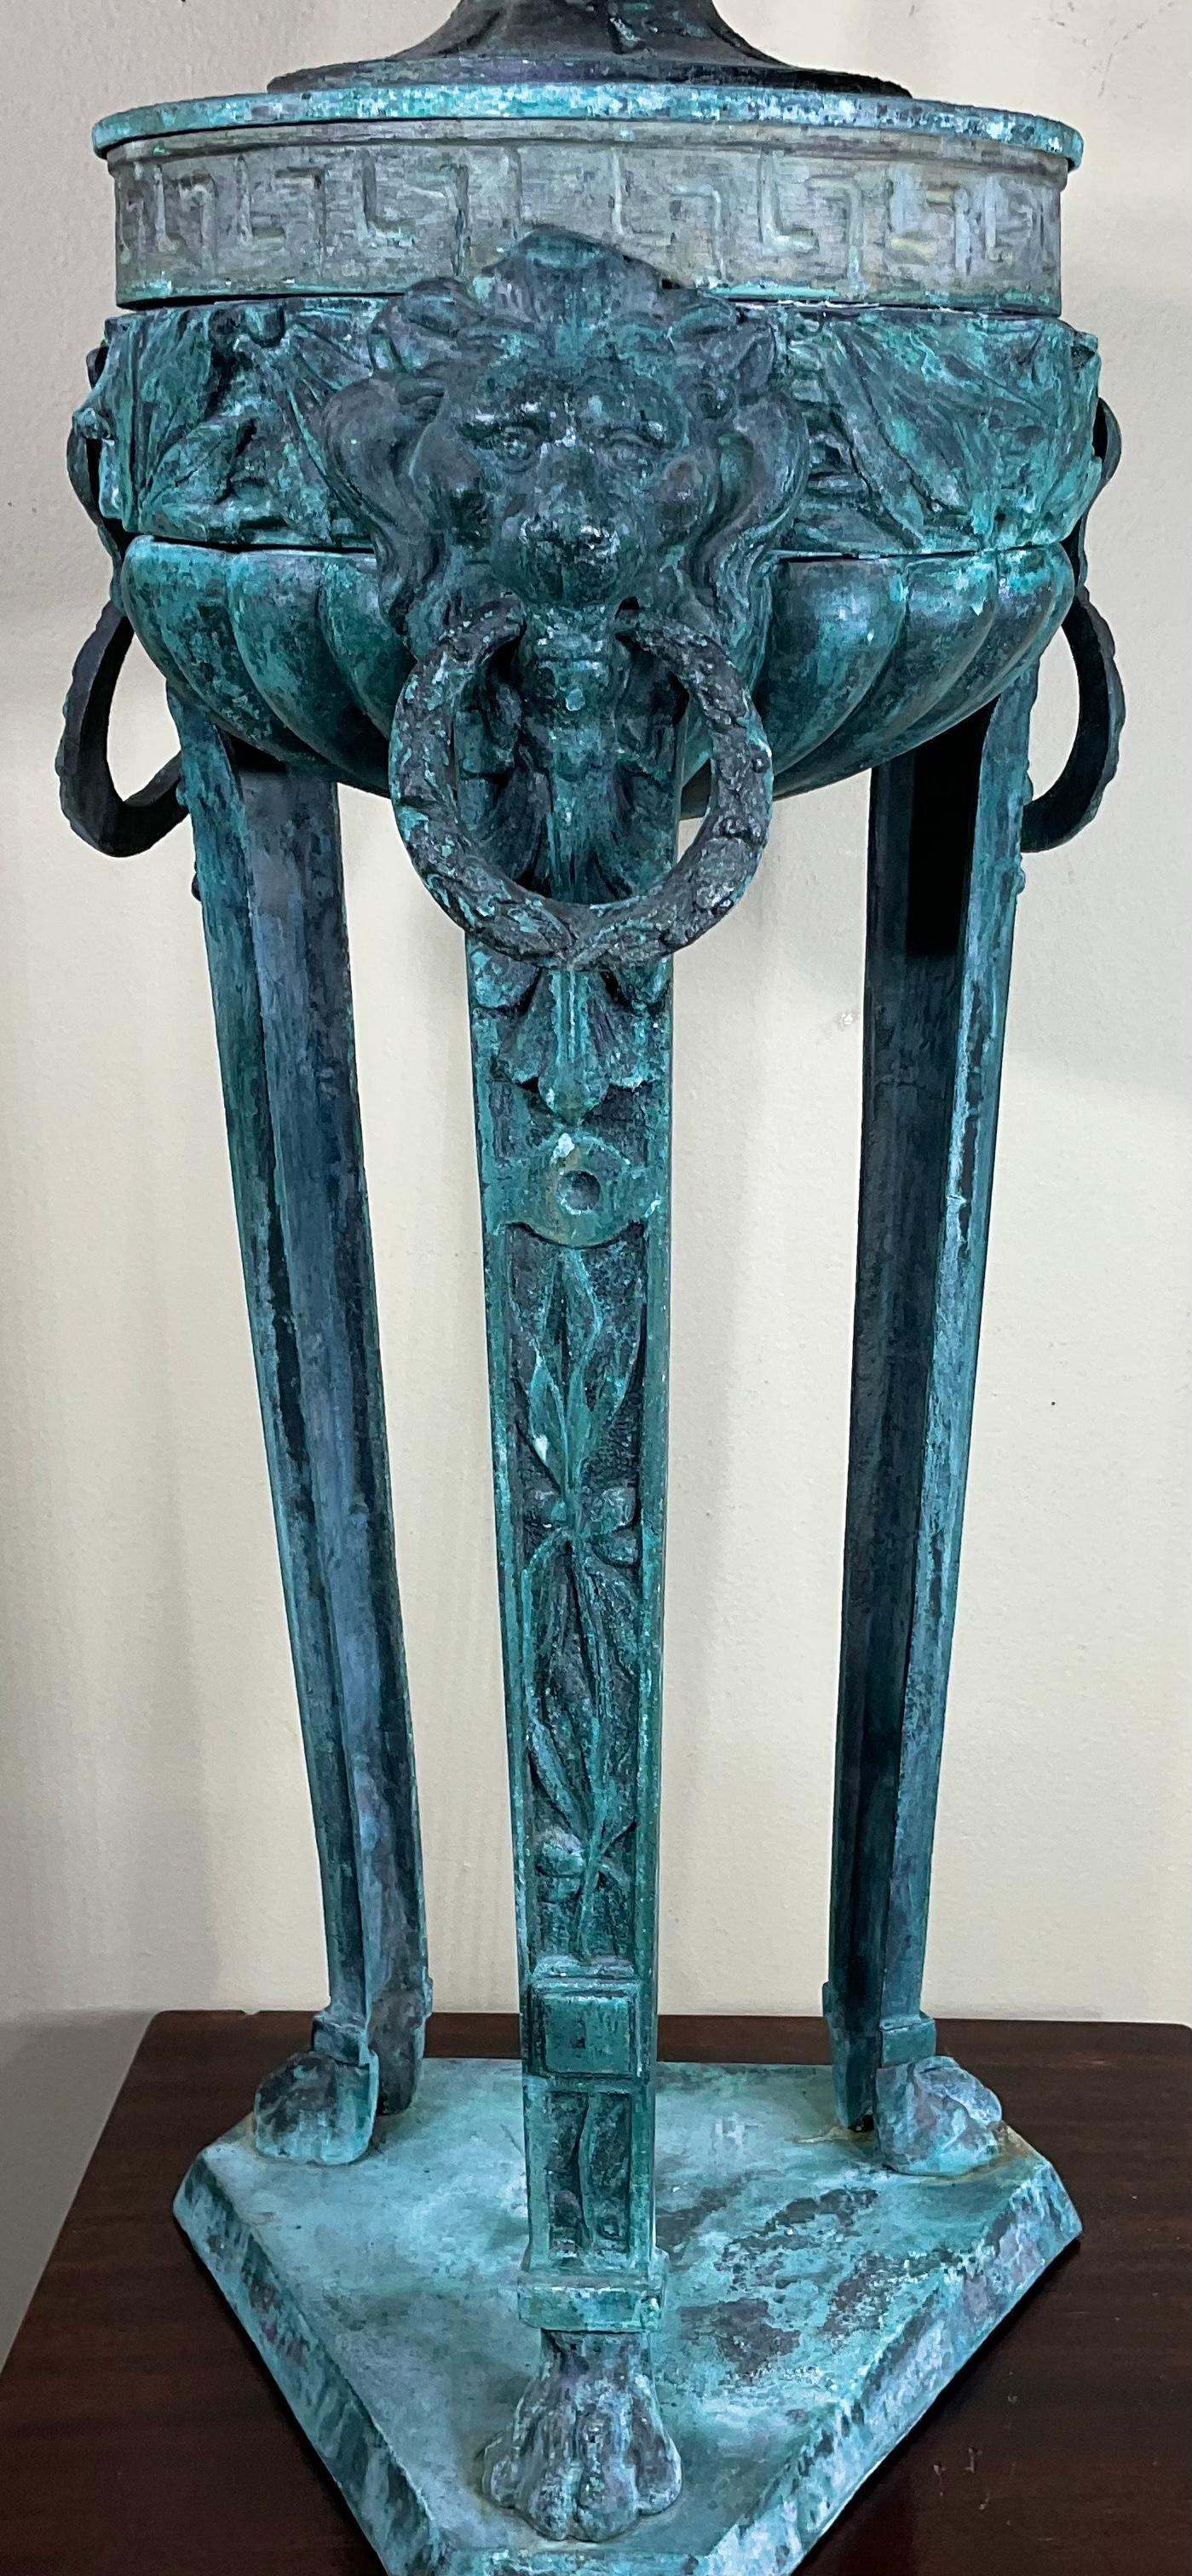 Exceptional antique French bronze architectural element used as decorative object of art. Beautiful oxidized green-turquoise patina, lion heads and vines Greek key motifs, one of a kind object of art for display.